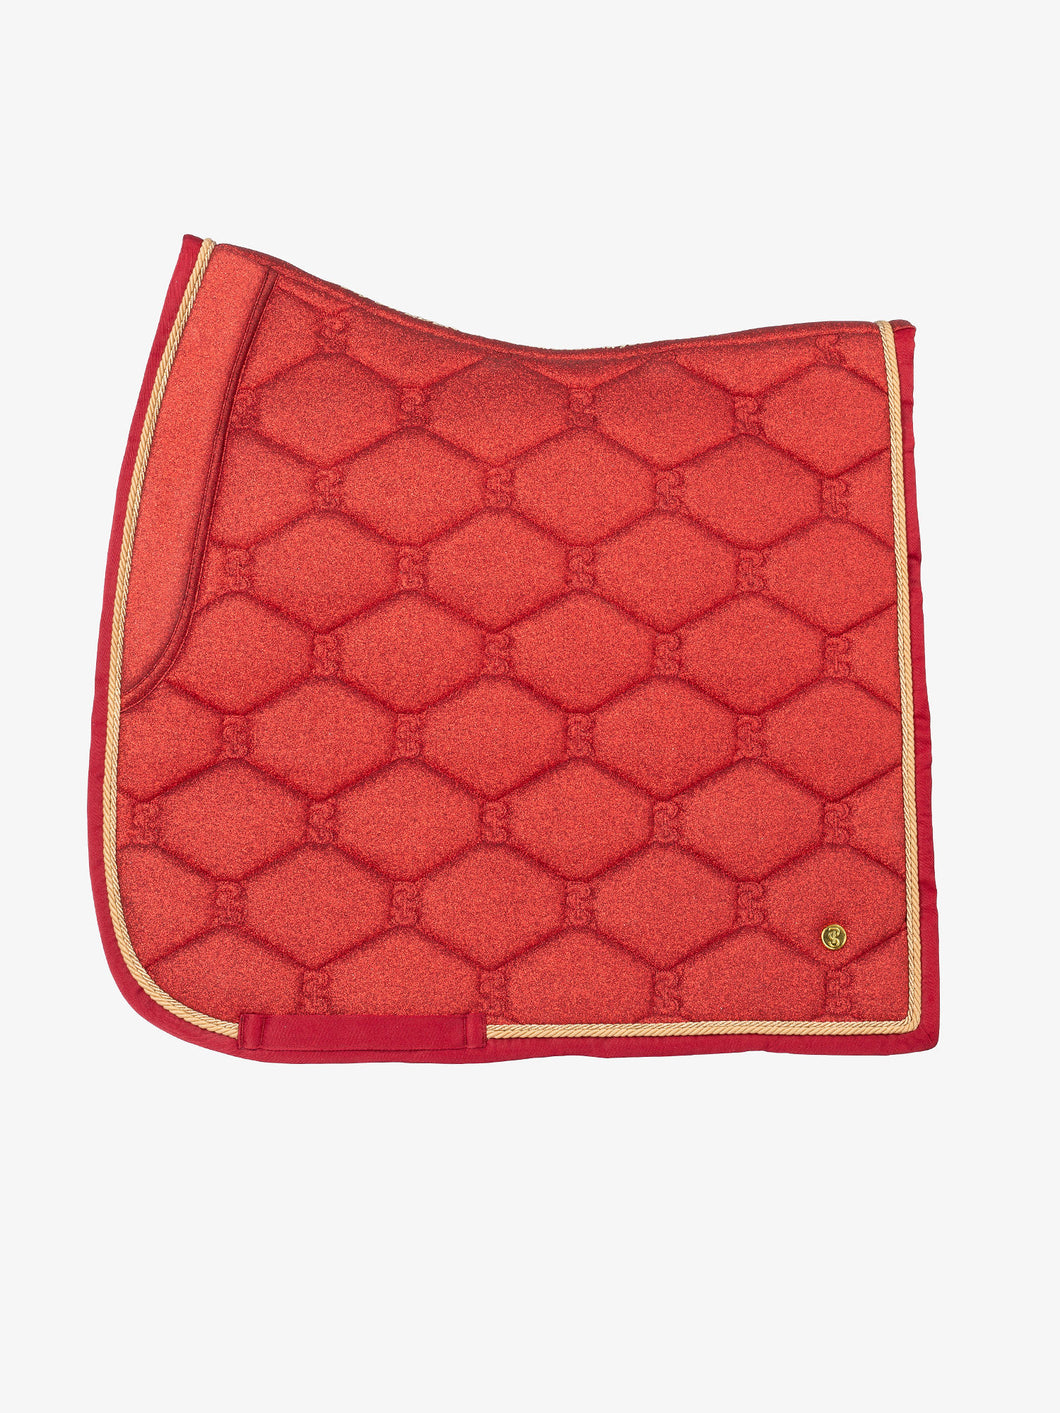 Christmas 2022, Stardust Dressage Saddle Pad, Red/Gold